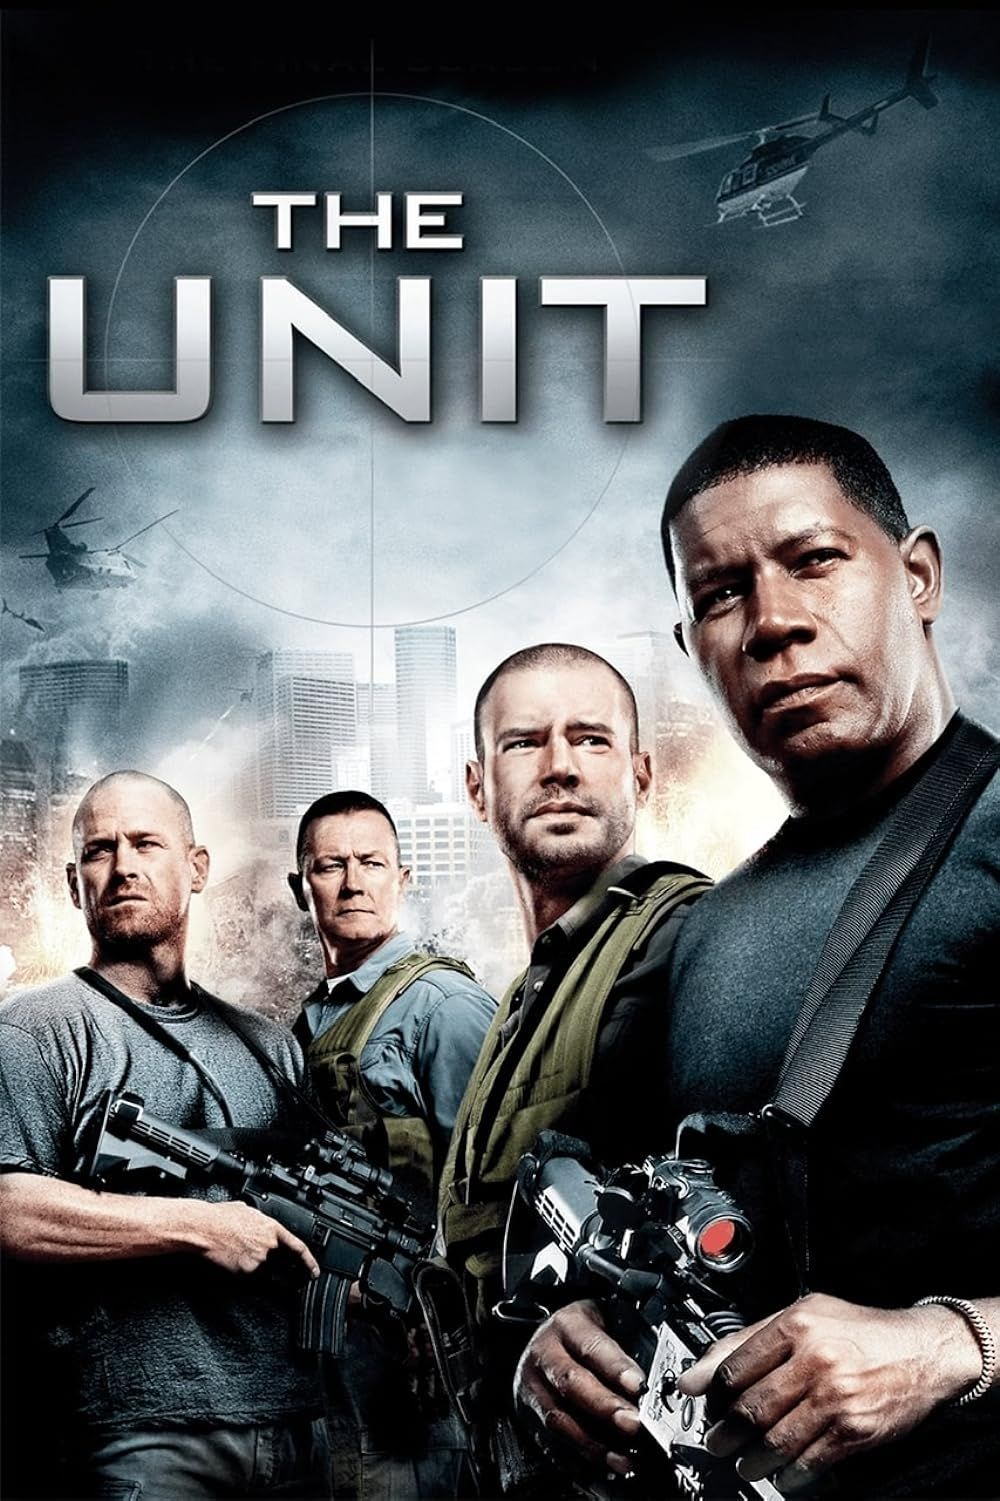 Poster of The Unit, 2006 TV series with Dennis Haysbert, Max Martini, and Robert Patrick